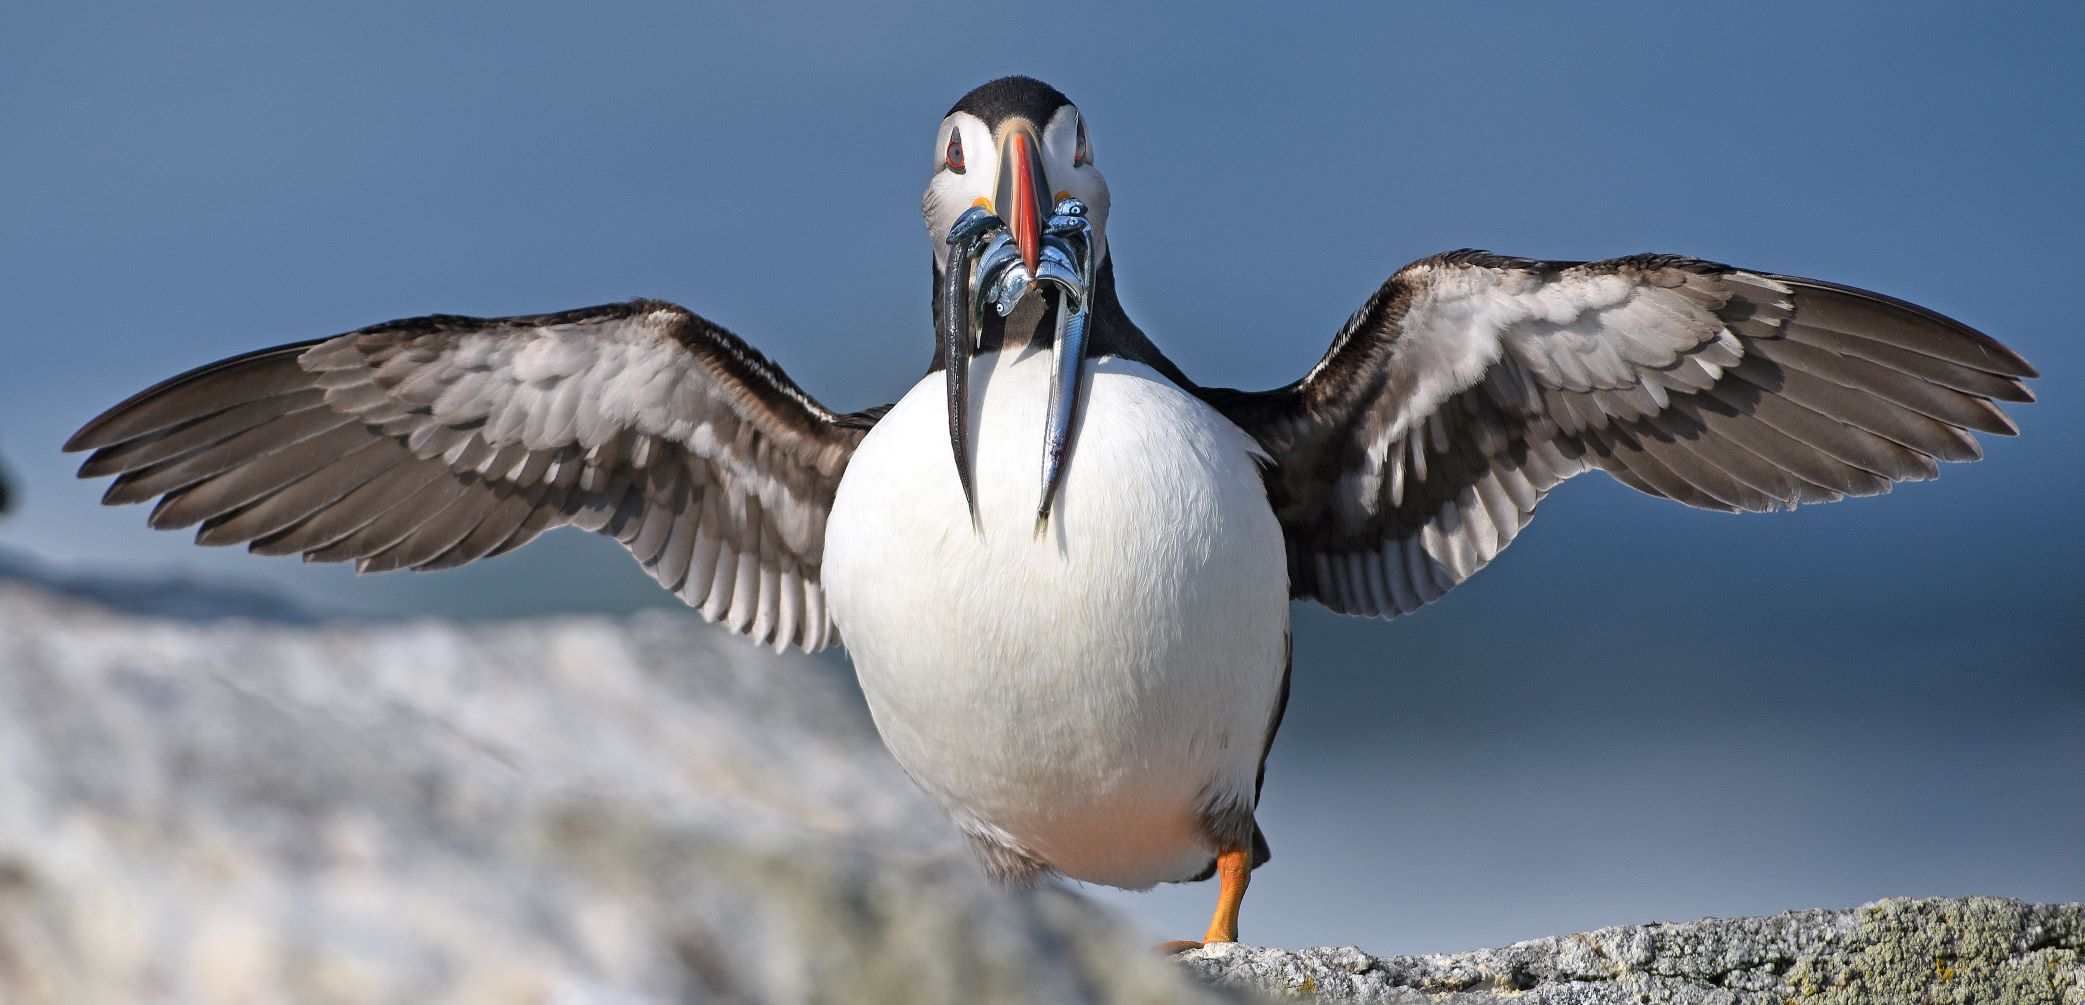 A puffin spreads its wings while holding a fish in its beak